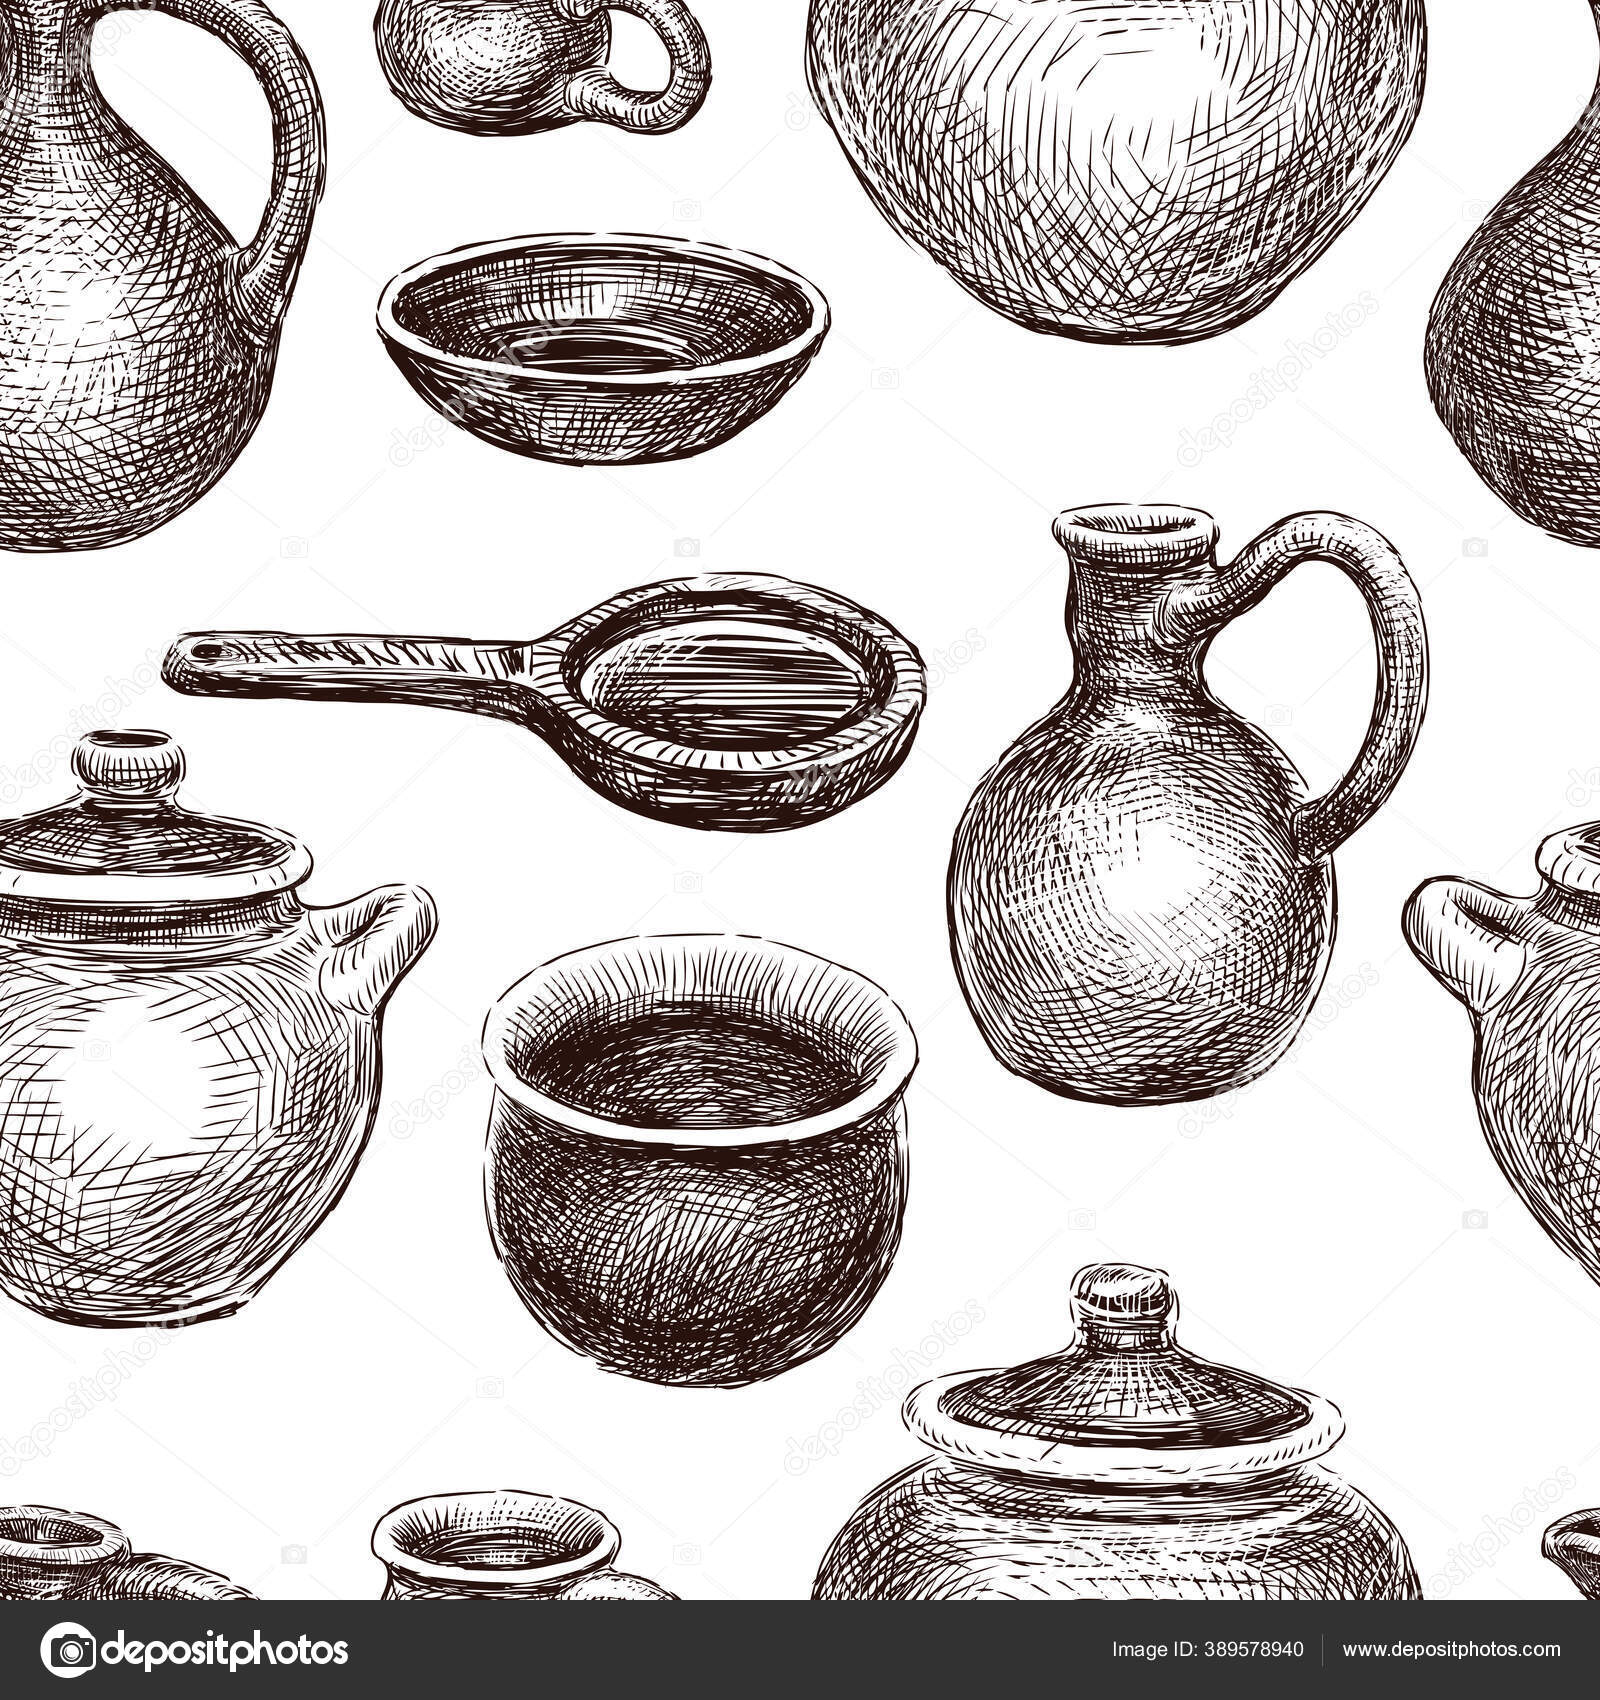 Pottery sketches on Pinterest